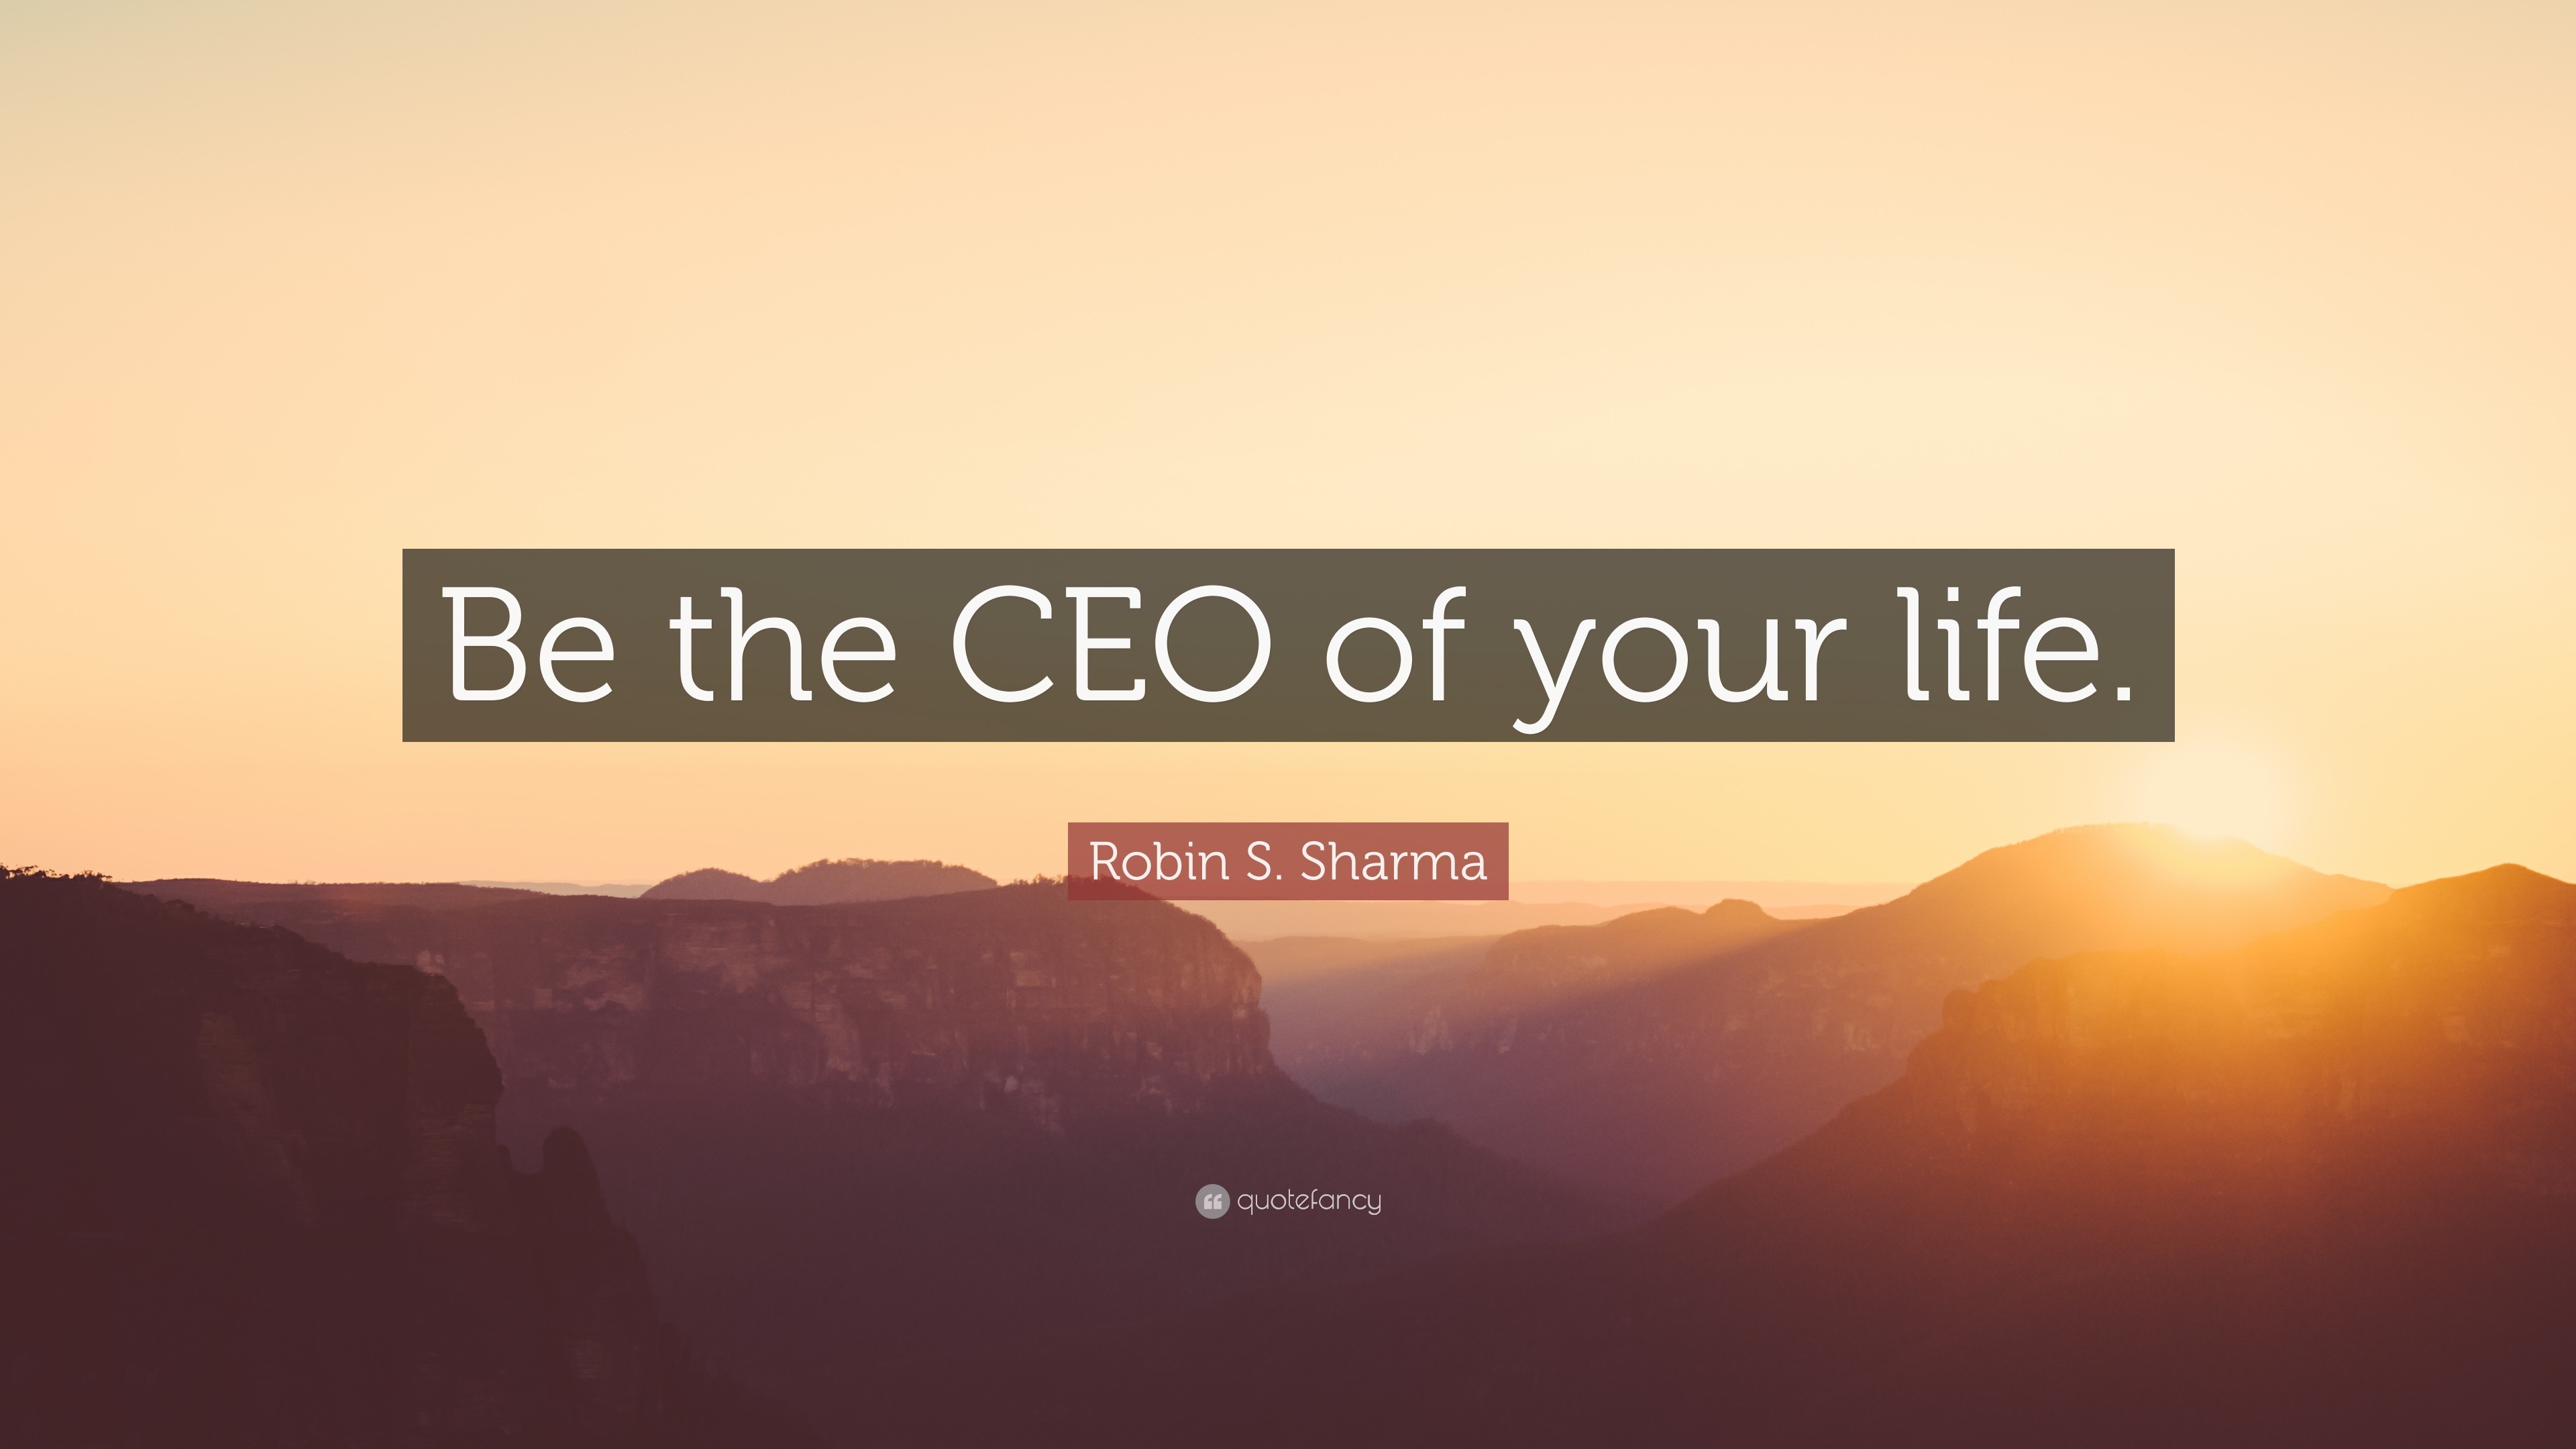 Robin S Sharma Quote “Be the CEO of your life ”